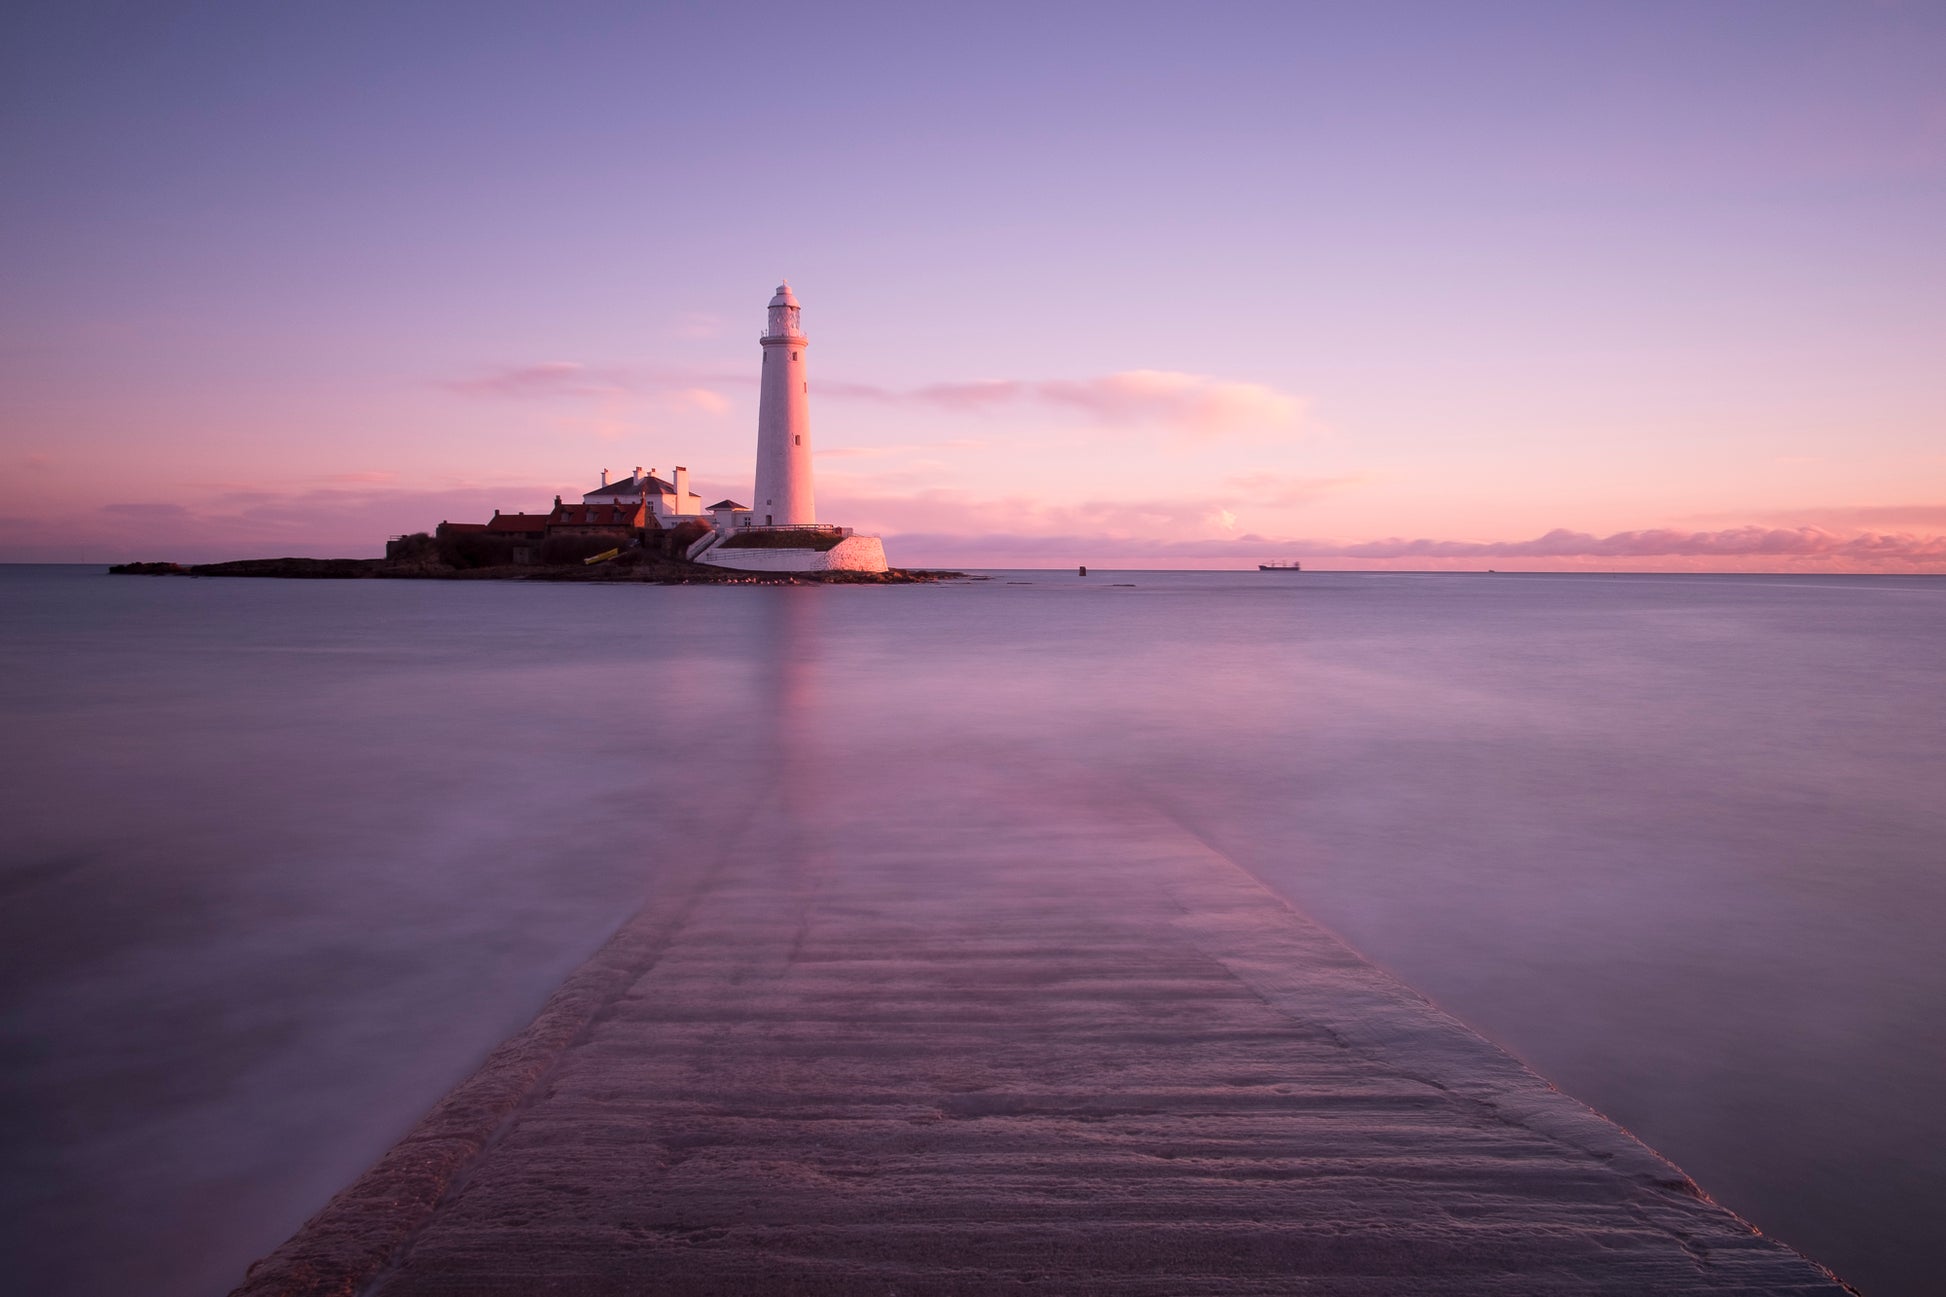 St Mary's Island & Lighthouse, Whitley Bay